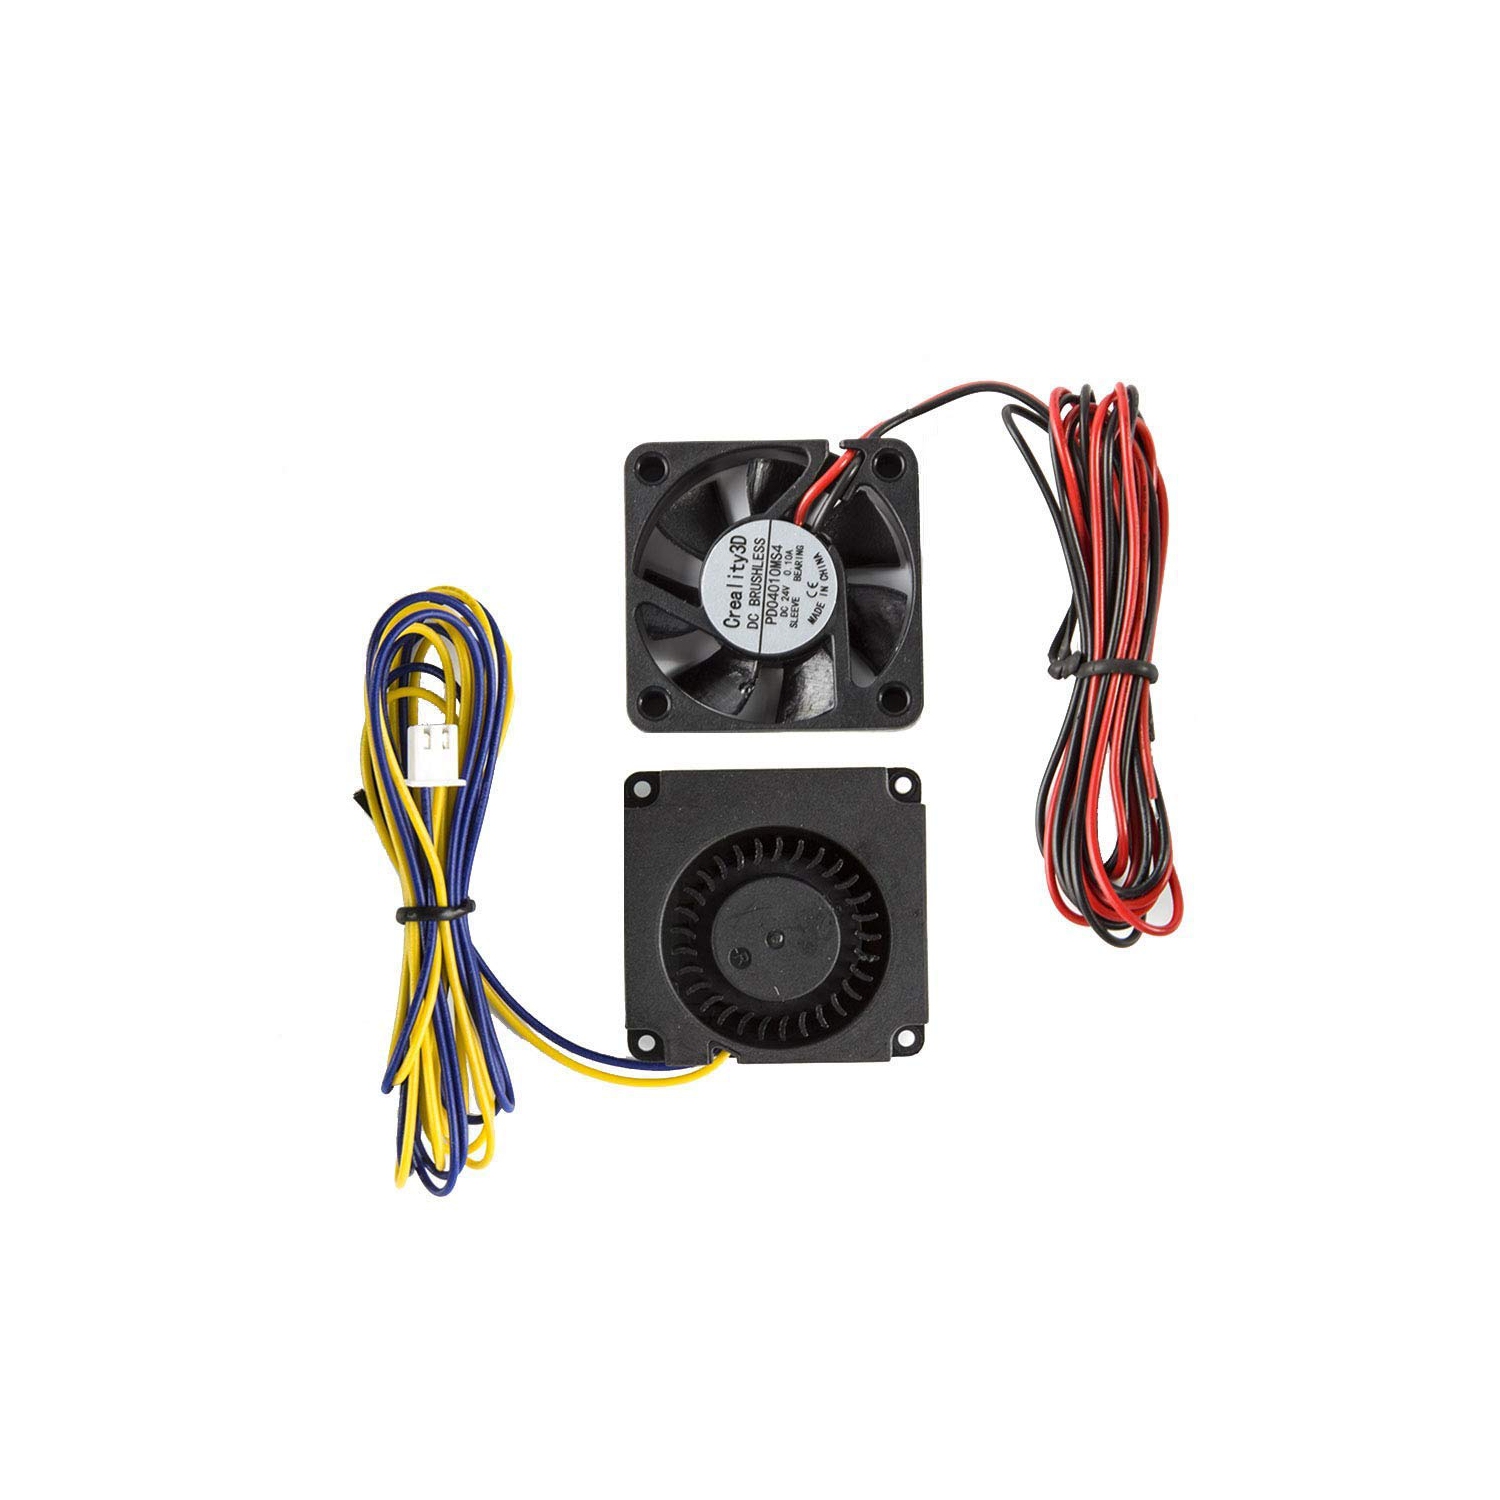 Canadian local seller-Mech Solutions Creality Original 4010 Blower 40x40x10MM 24V DC Cooling Fan and 24V Circle Fan for 3D Printer Parts Ender 3/Ender 3 Pro